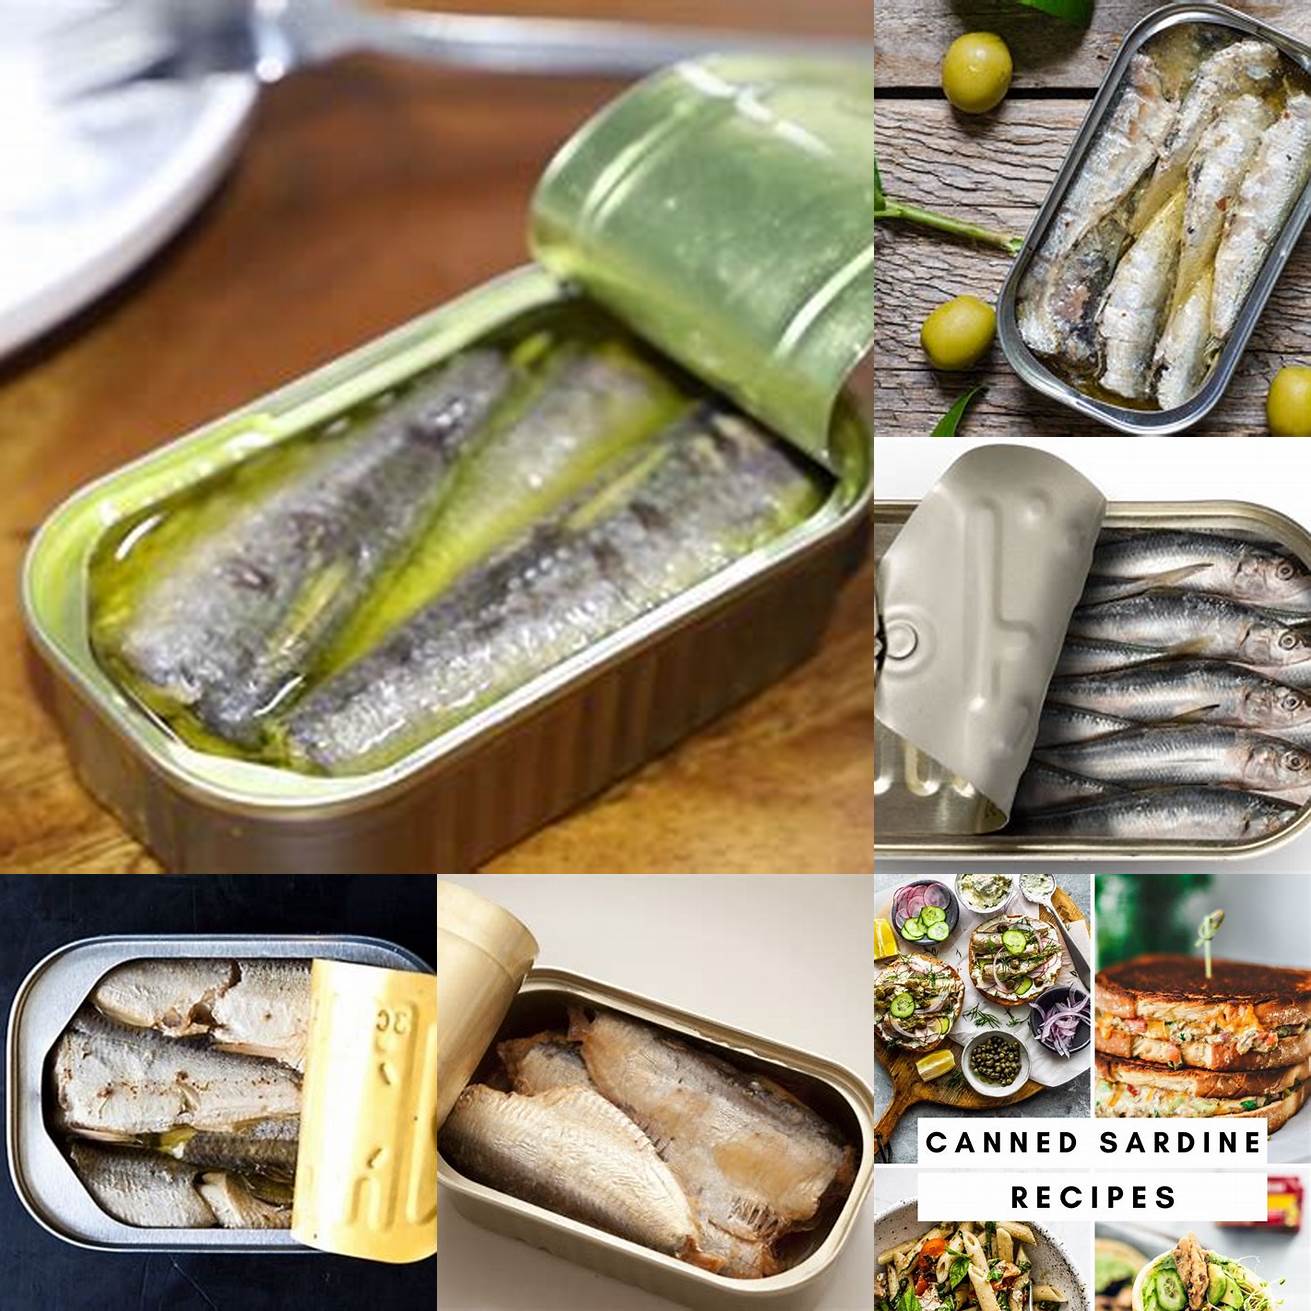 Canned sardines can help prevent heart disease in cats